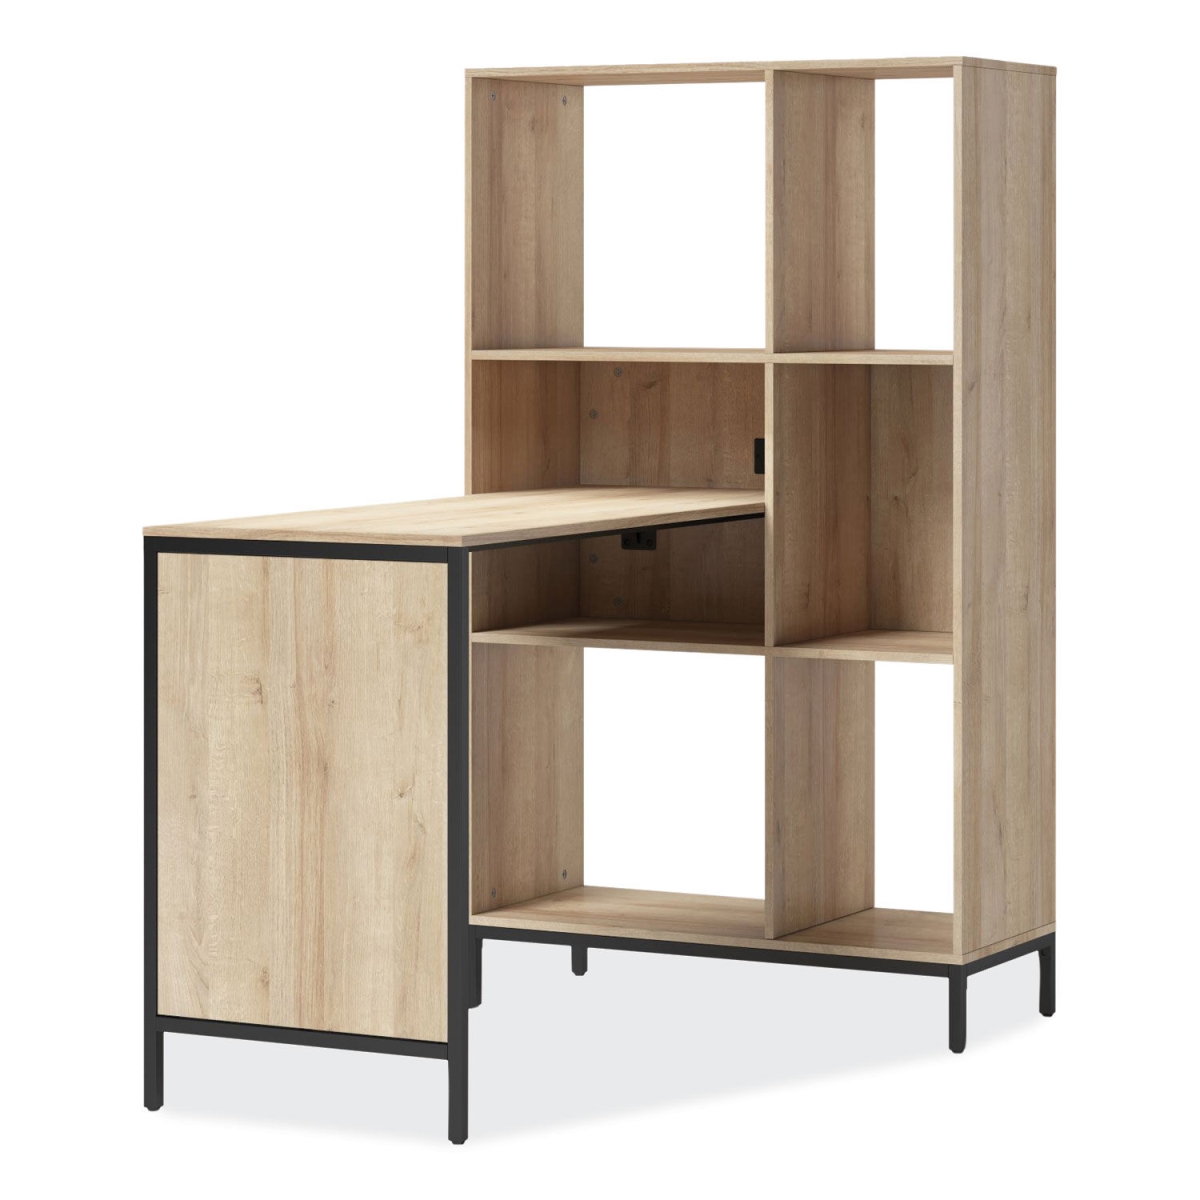 Whalen Furniture WHLTU48CD Turing Home Office Workstation with Integrated Bookcase & Power Center - 48.3 x 31.75 x 55.25 in. - Desert Ash & Black -  Whalen Furniture Manufacturing Inc